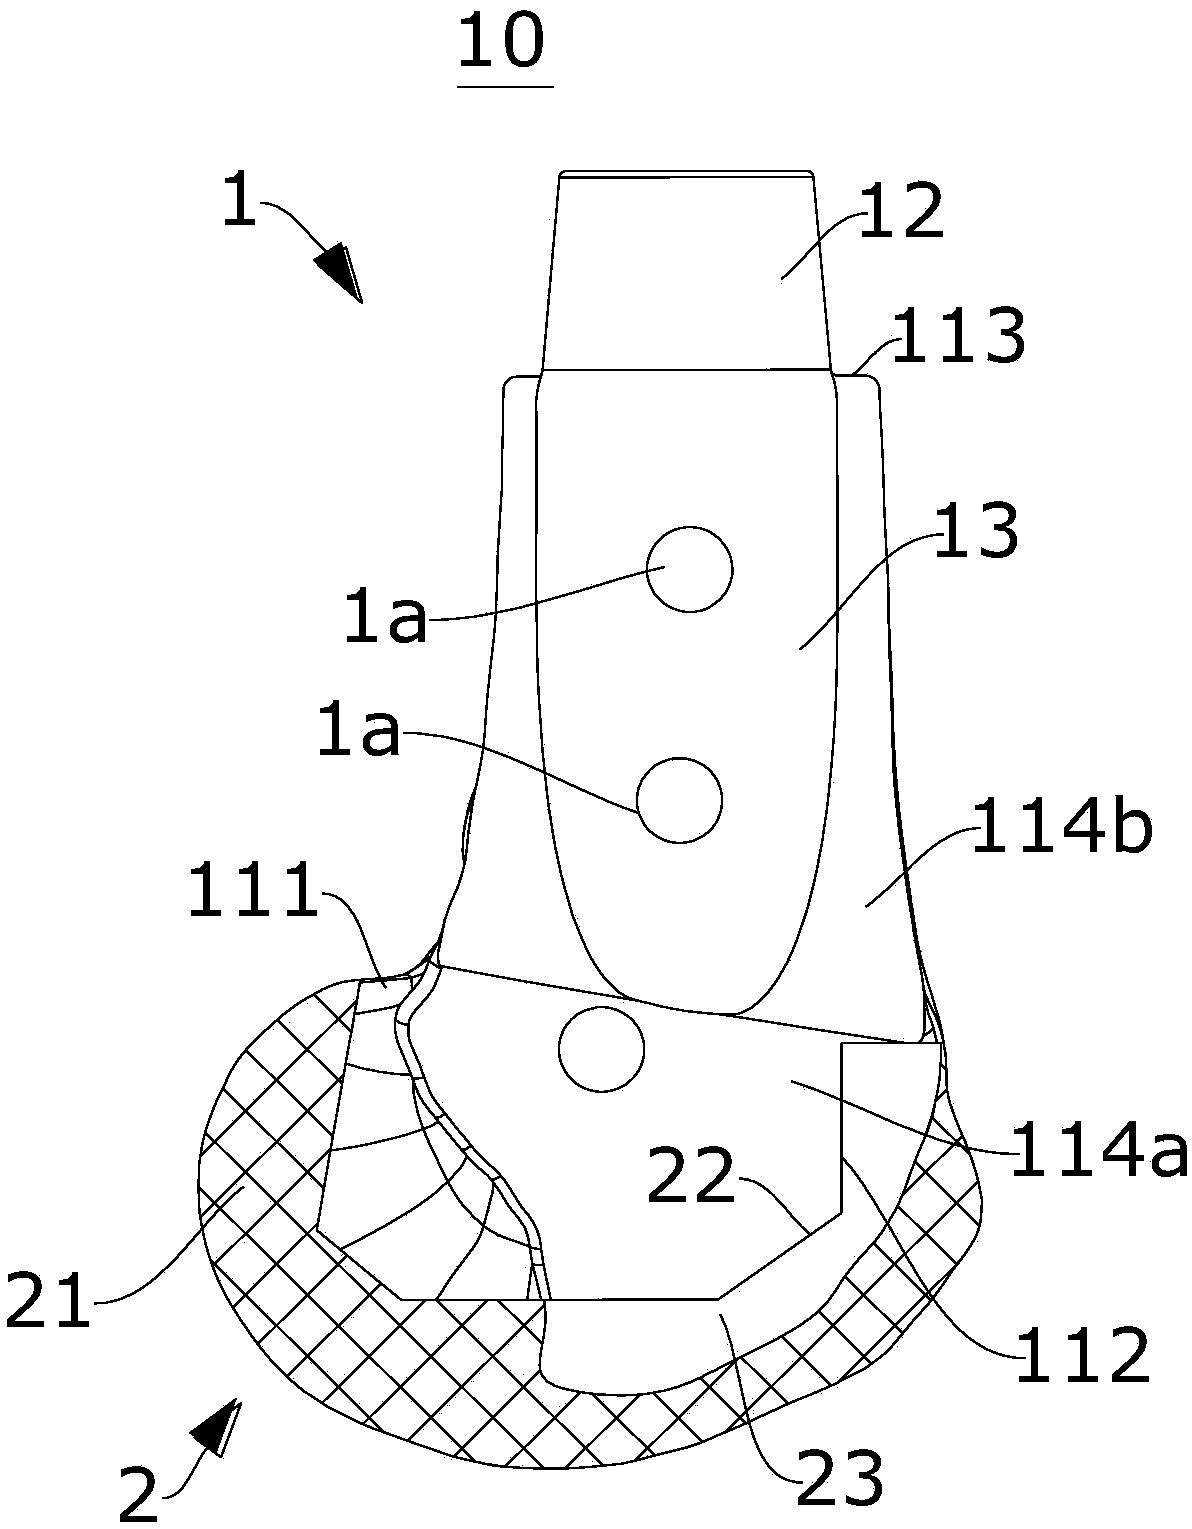 Single-ankle type knee joint prosthesis